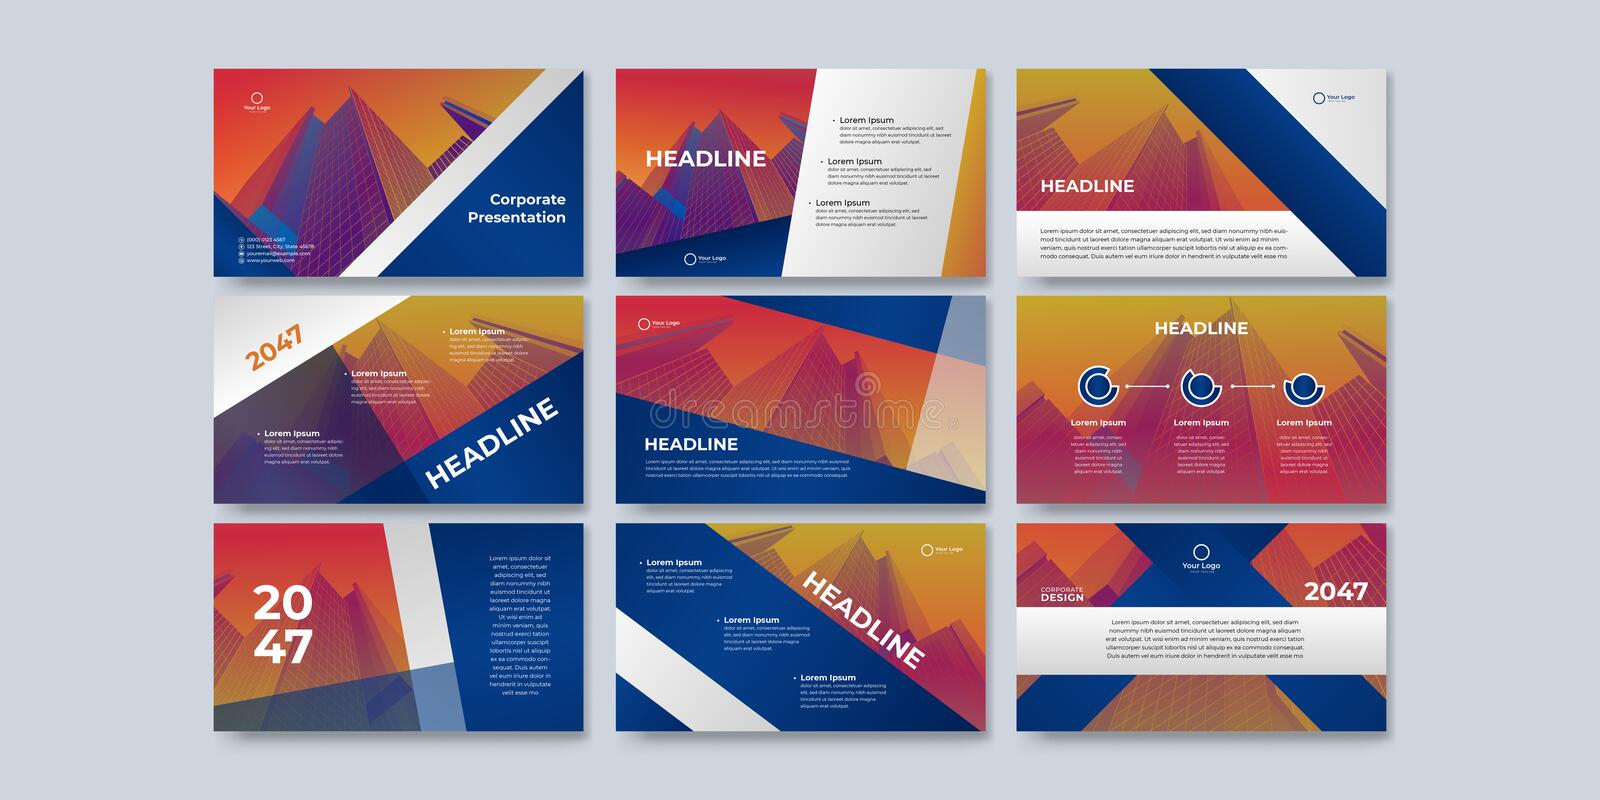 Dark Blue Presentation Templates Set for Business and Construction